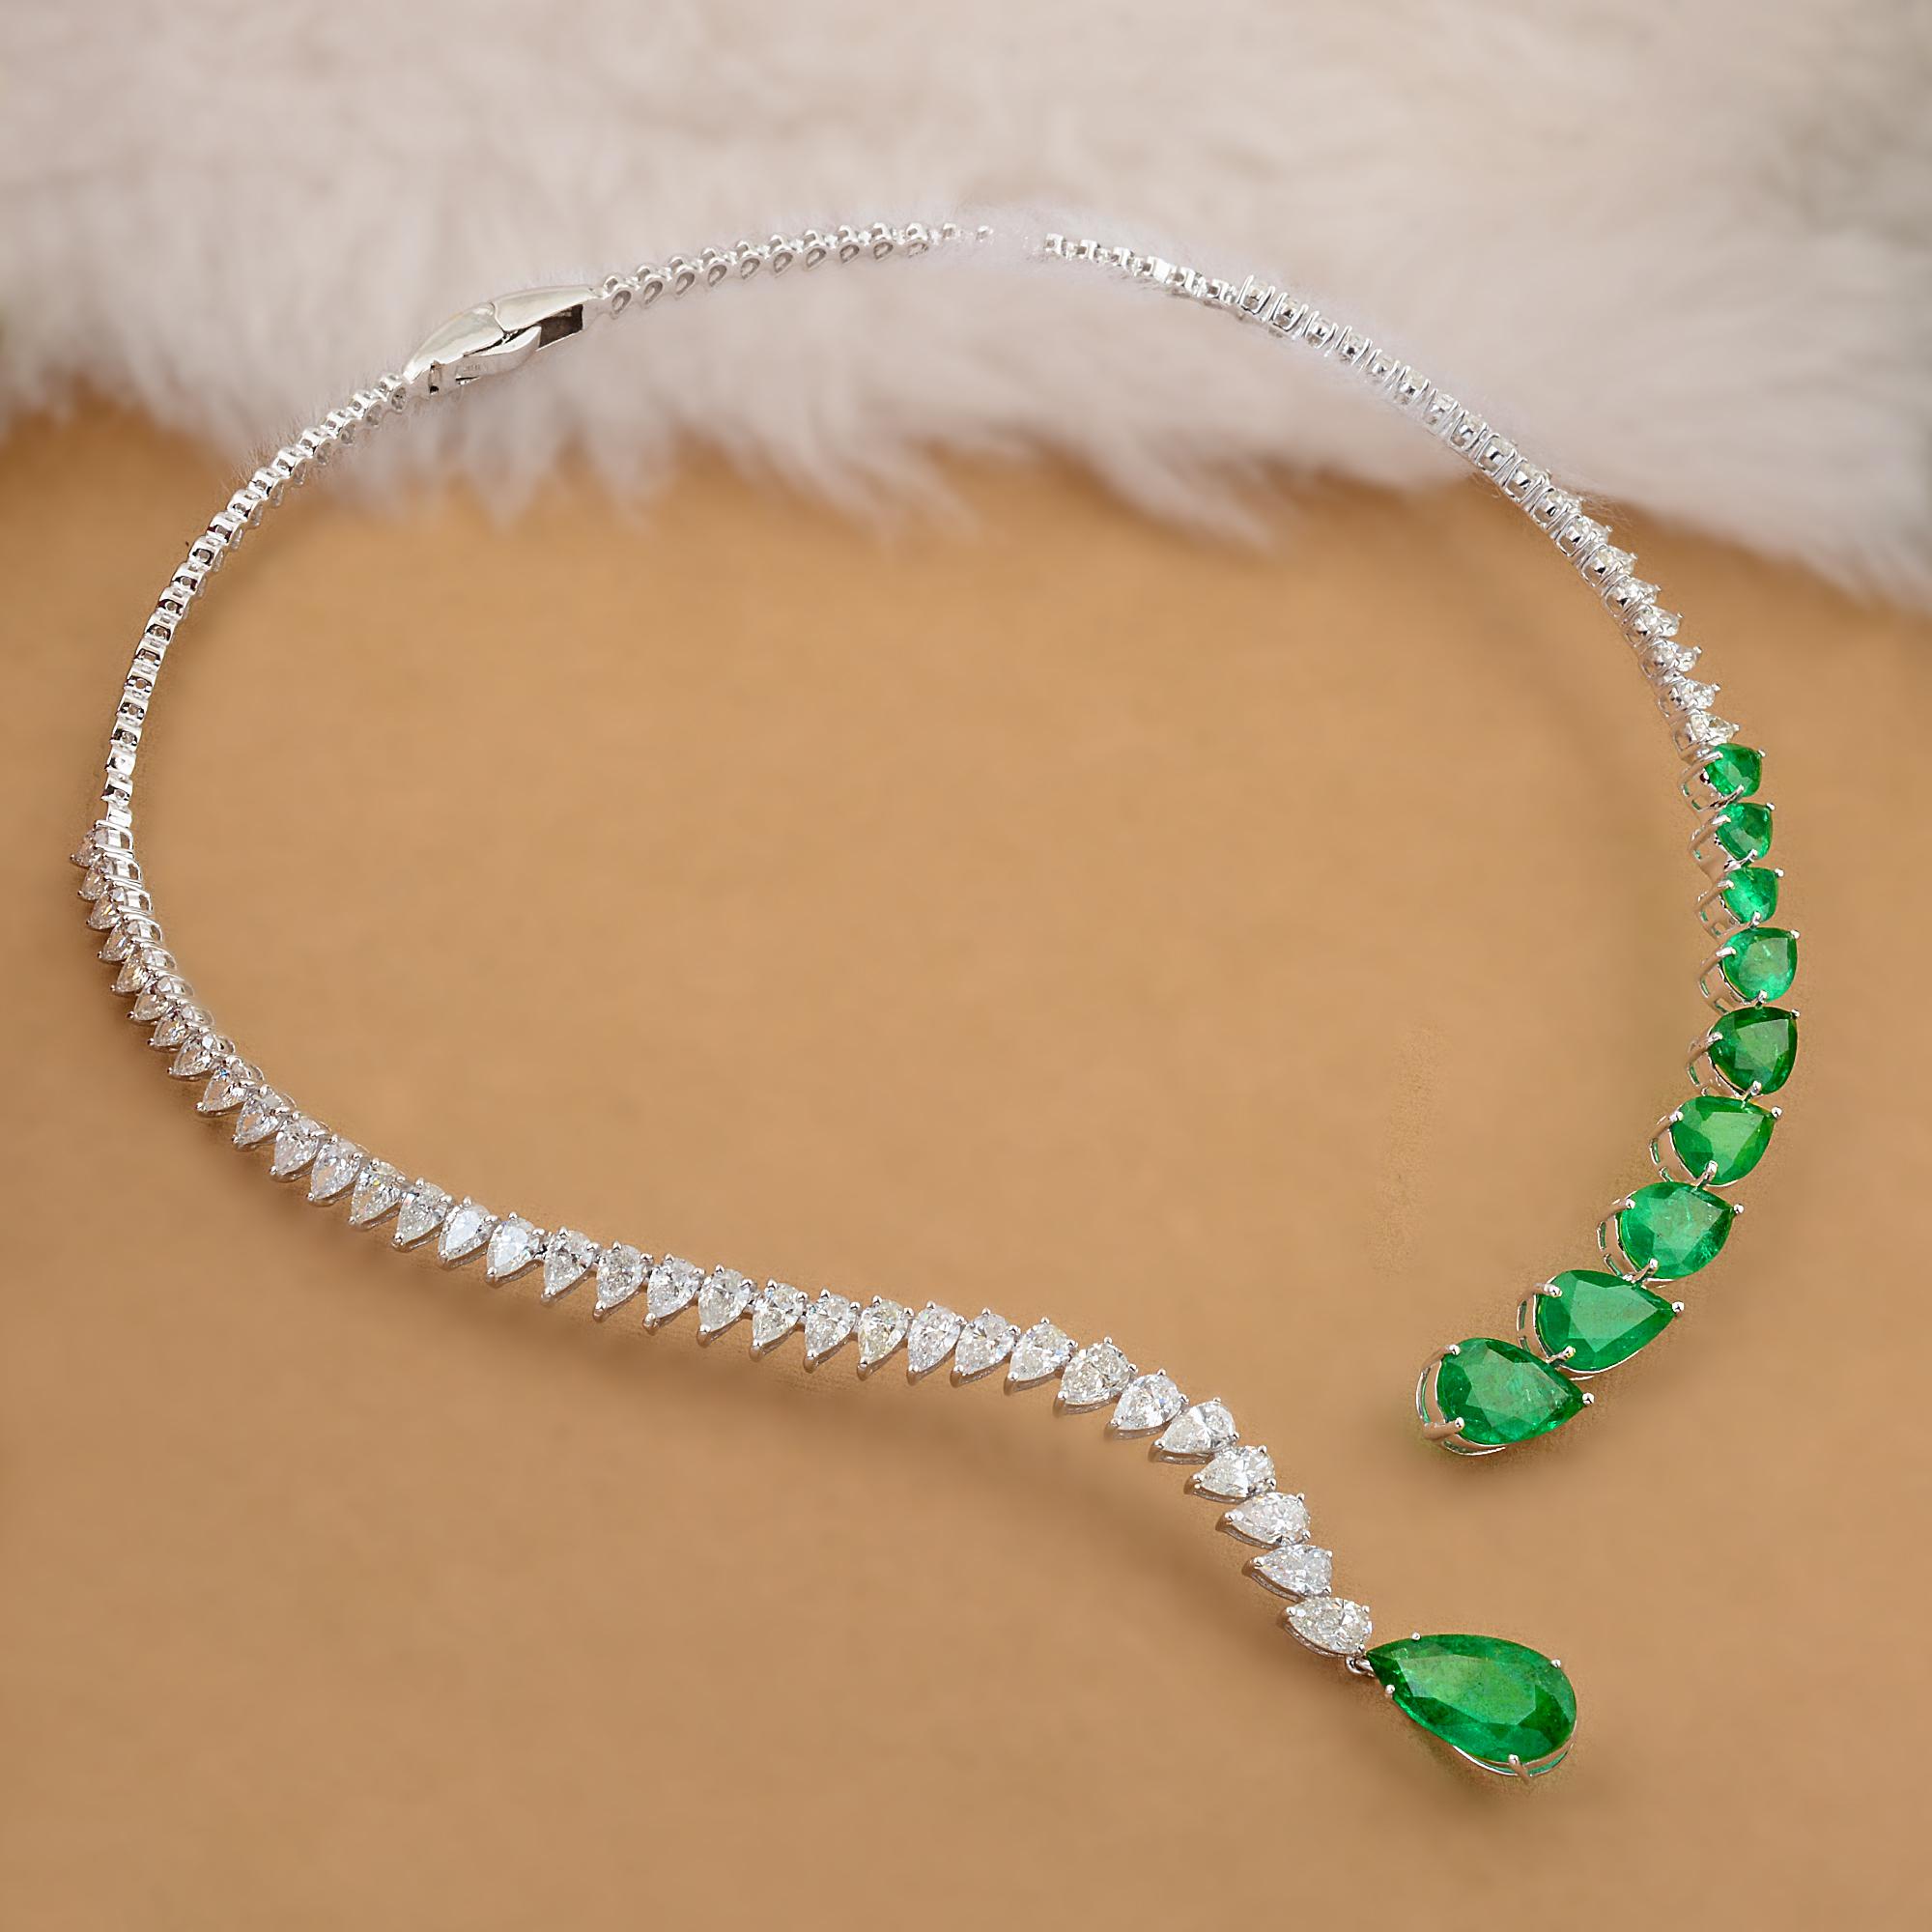 This collar choker necklace is designed to sit gracefully around the neck, accentuating the wearer's neckline and adding a touch of sophistication to any ensemble. It is a versatile piece that can be worn for special occasions, formal events, or to